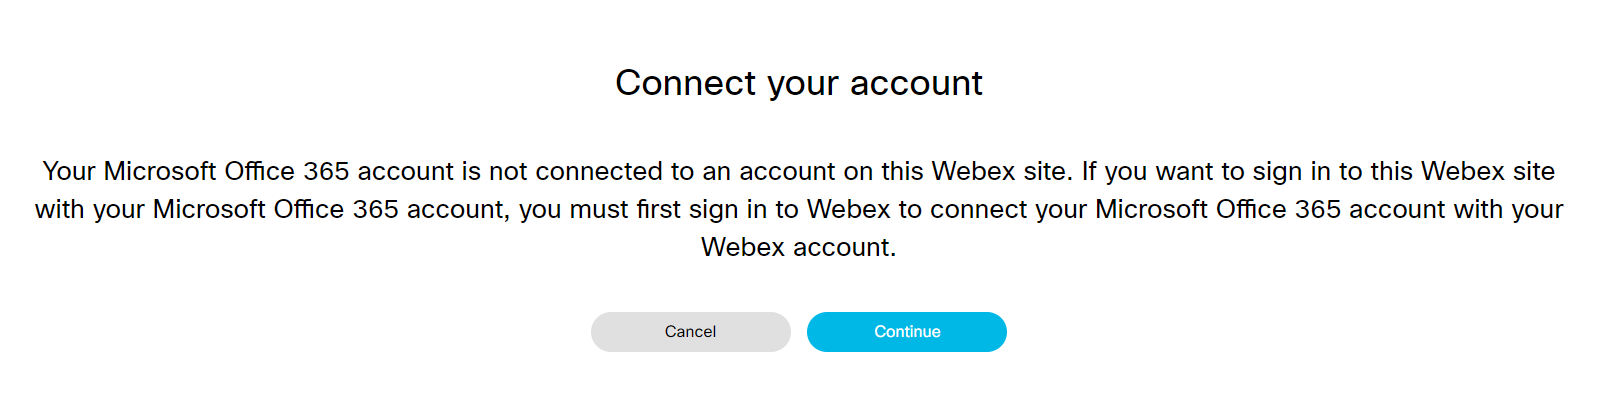 Connet Webex with Office 365 Account